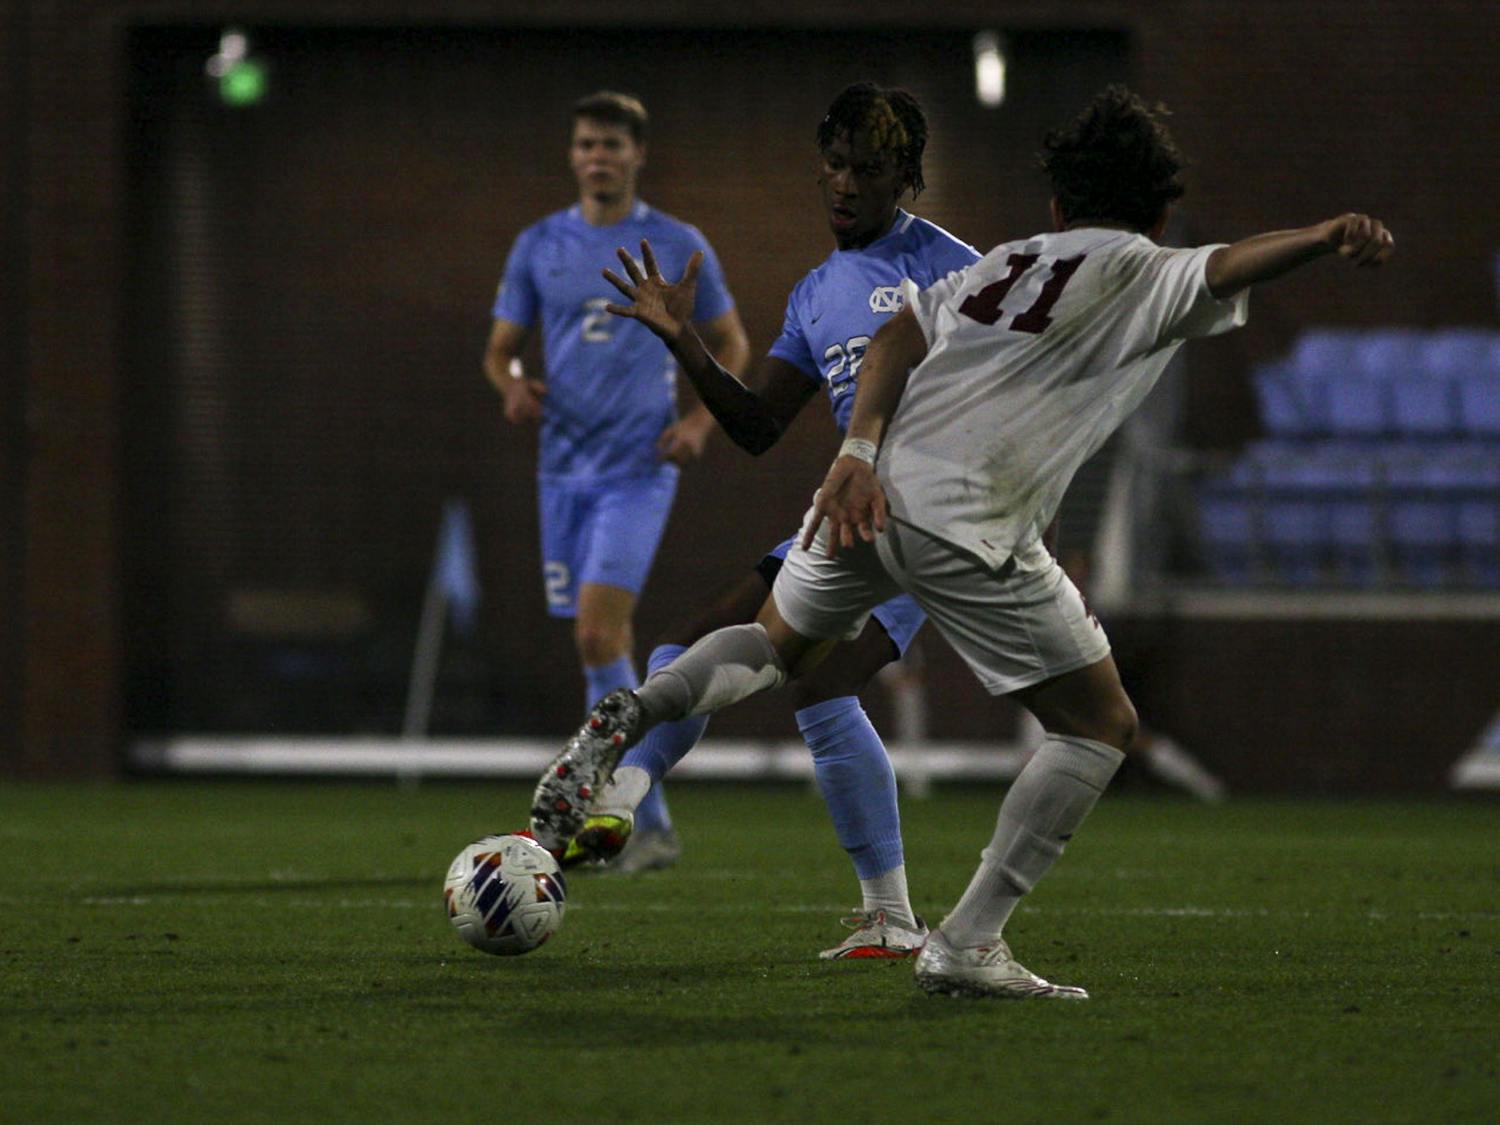 UNC junior midfielder/forward Ernest Bawa (20) defends the ball during the men's soccer against Boston College at Dorrance Field on Wednesday, Nov. 2, 2022. UNC beat Boston College 1-0.